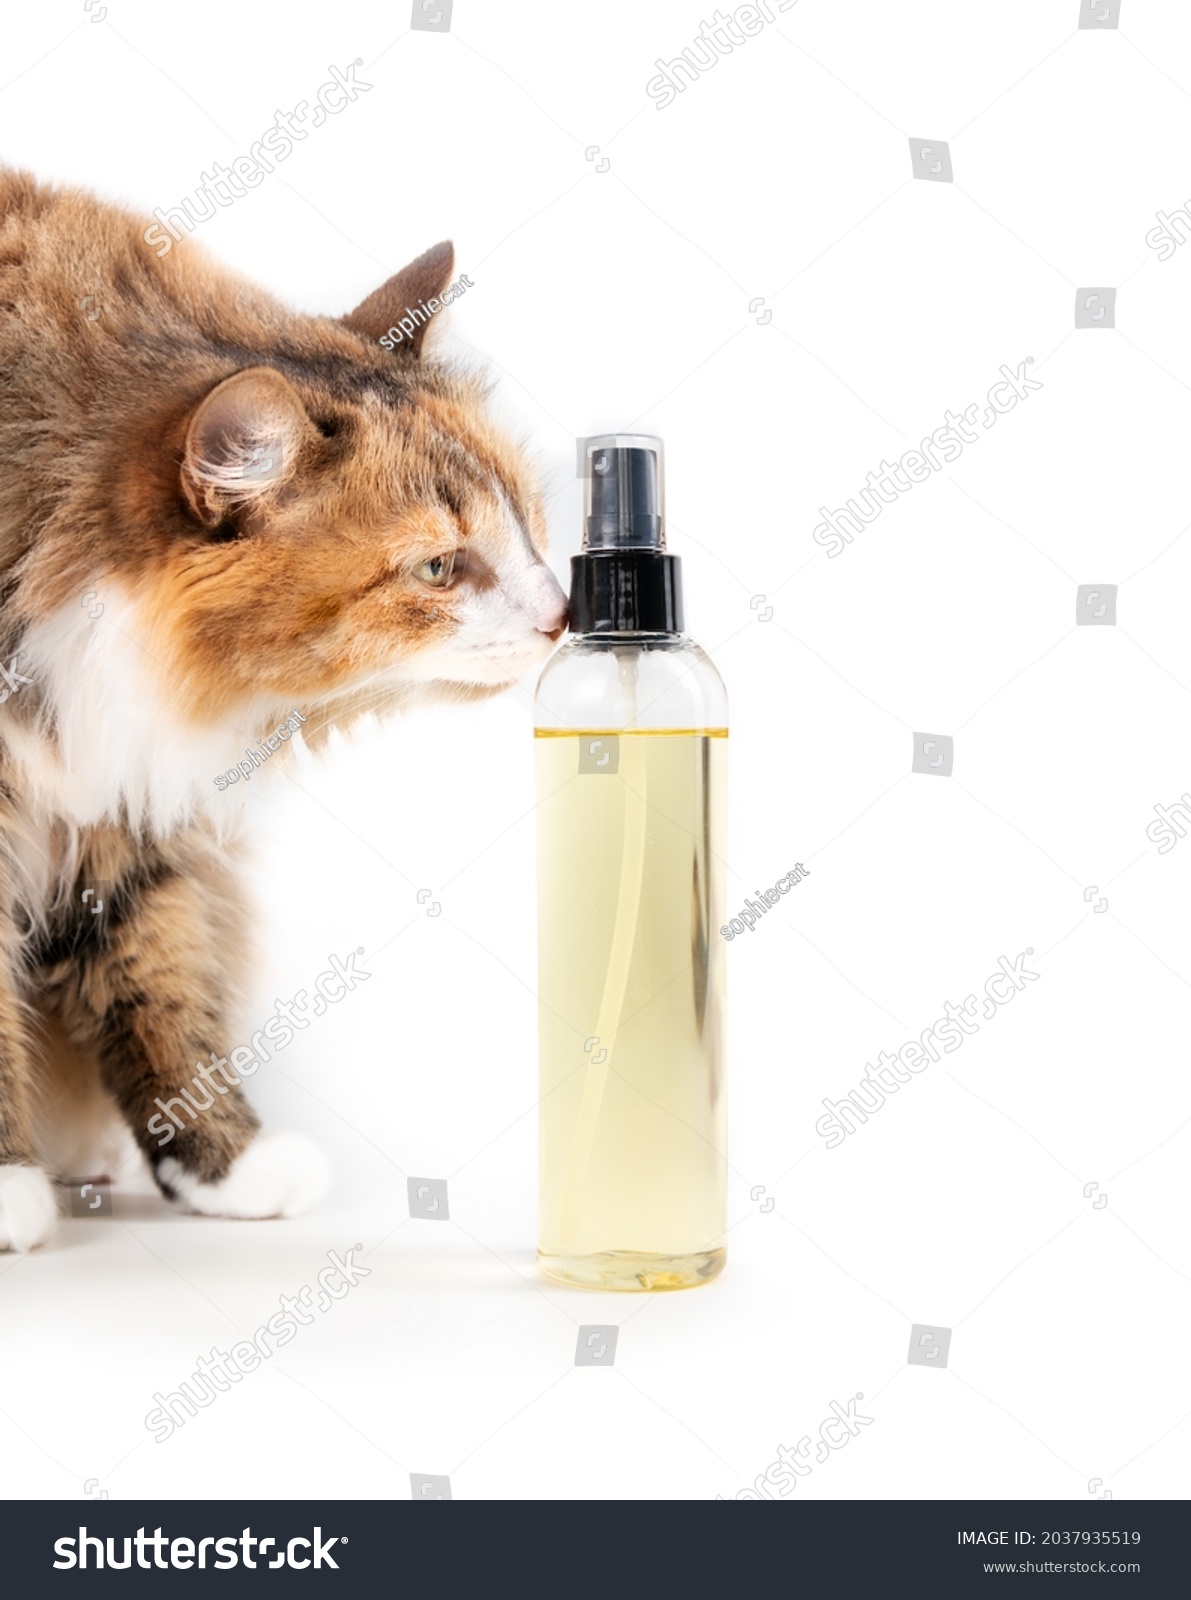 Cat sniffing on oil spray bottle, side view. Cat with a plain product sprayer filled with yellow translucent liquid. Oil spray, health or  supplement product. Selective focus. Isolated on white. #2037935519